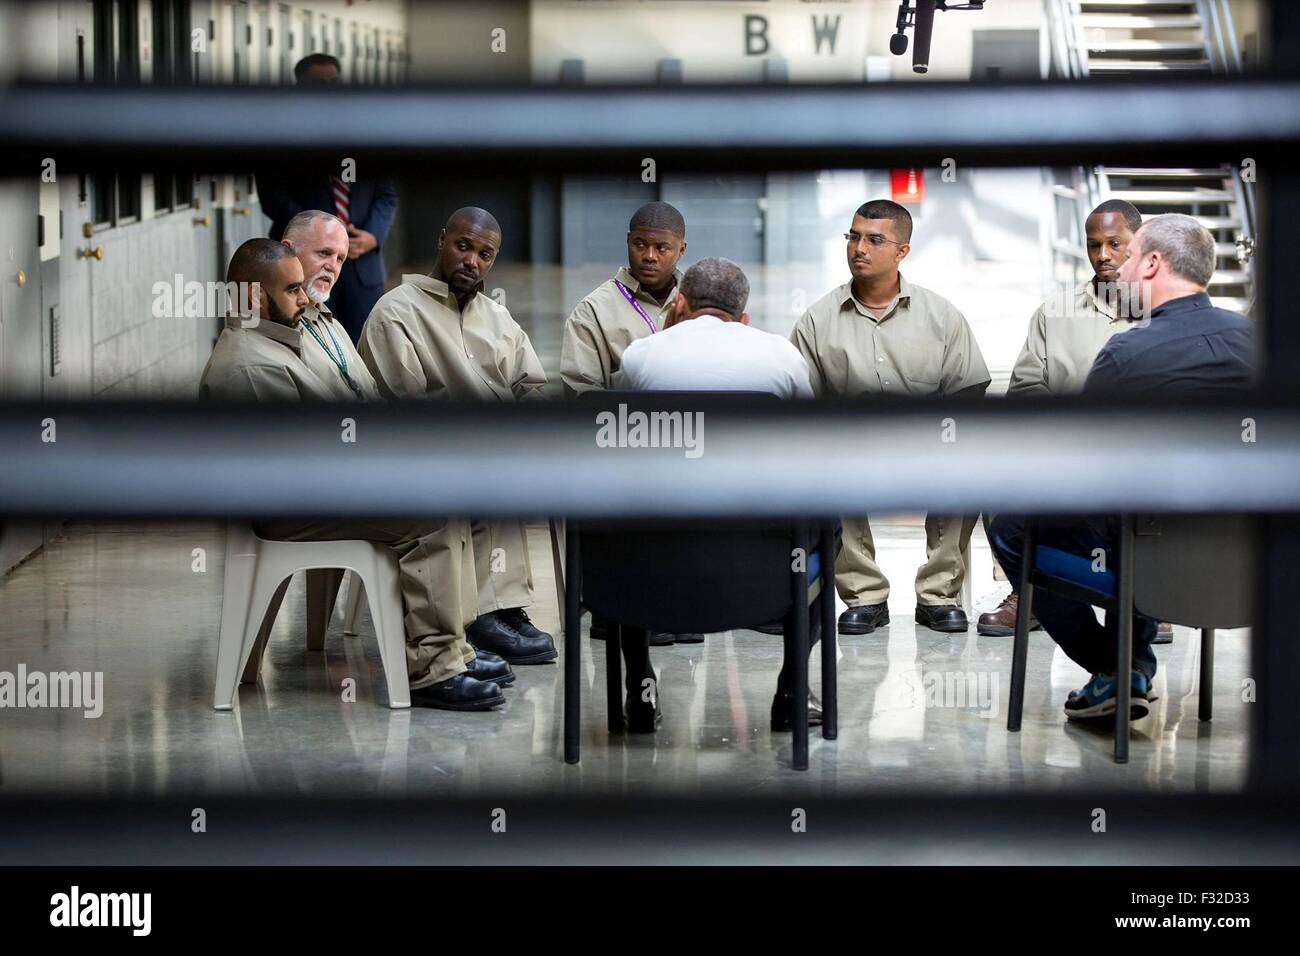 U.S. President Barack Obama meets with a group of inmates at El Reno Federal Correctional Institution July 16, 2015 in El Reno, Oklahoma. Obama's trip was the first visit by a sitting President to a federal prison. Stock Photo